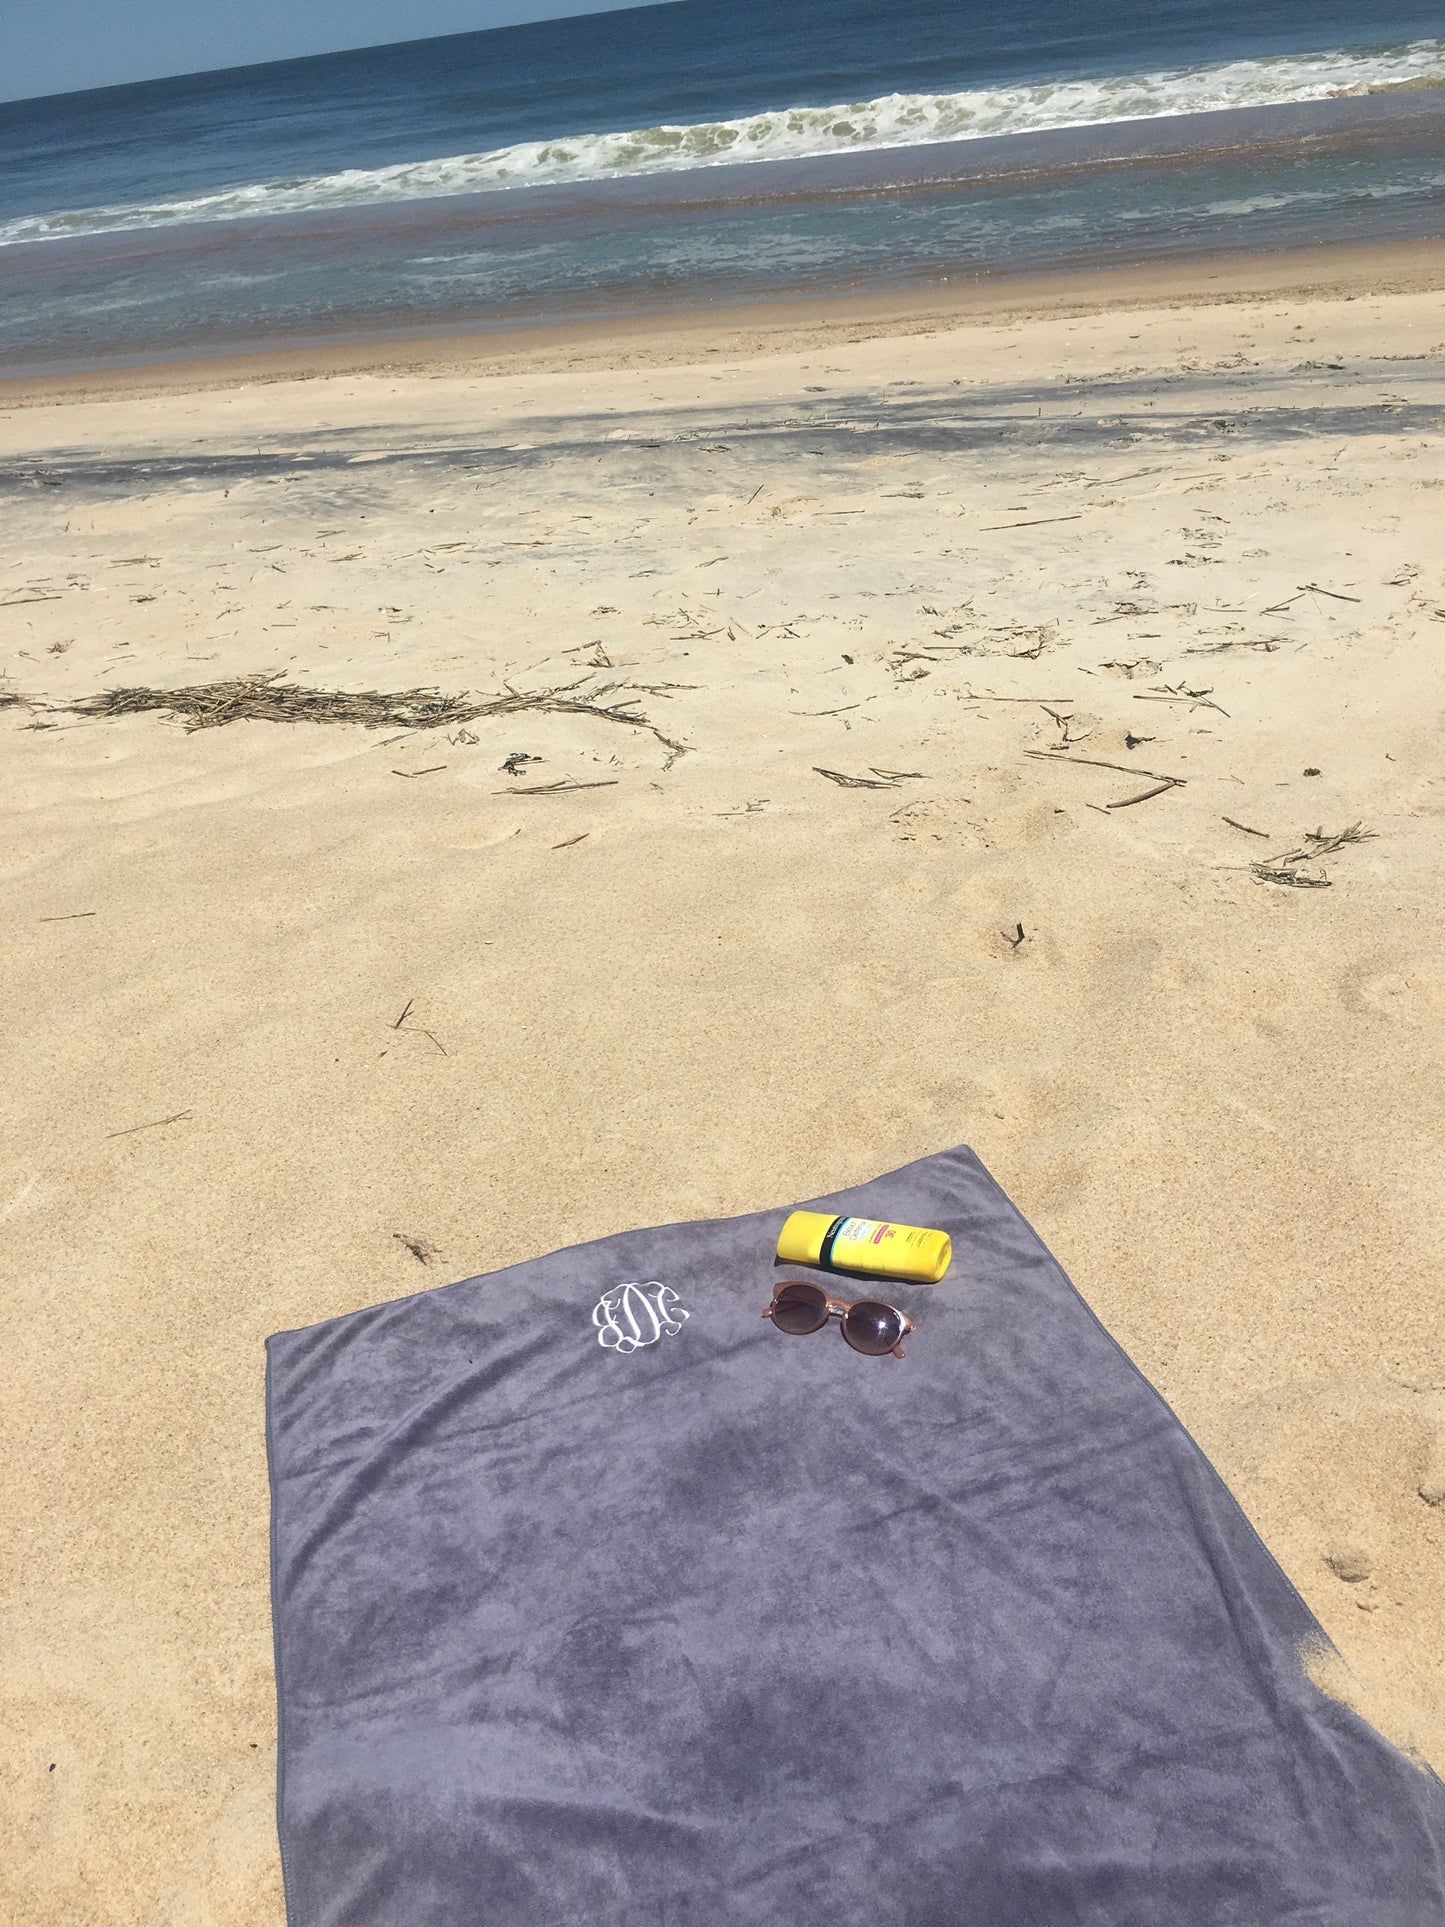 Personalized Microfiber Towel with Monogram - Use for Pool, beach, yoga etc.!